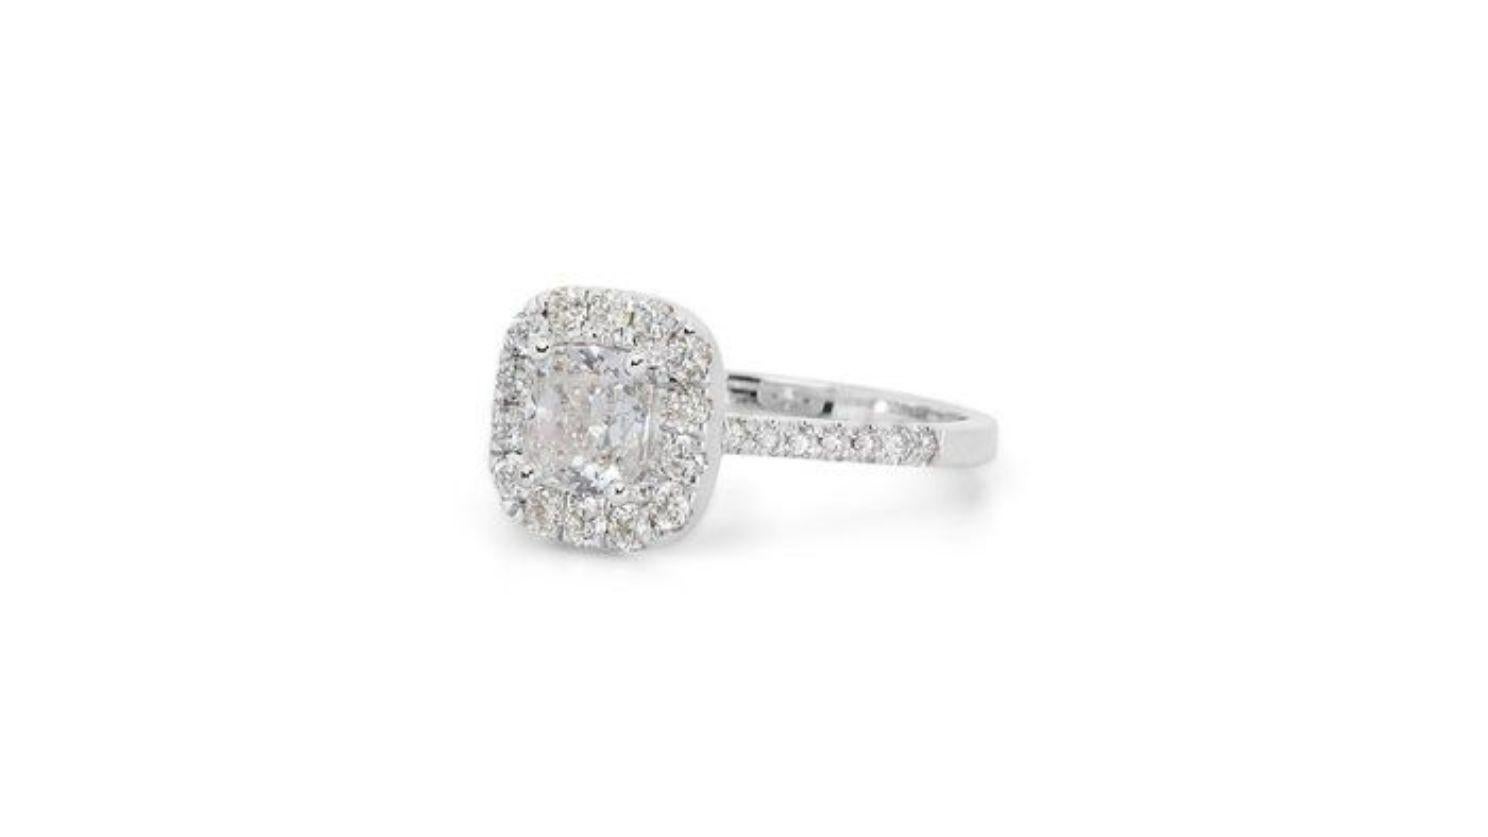 This exquisite ring is a masterpiece of brilliance, featuring a breathtaking 1.01ct cushion modified brilliant diamond as its centerpiece. Graced with the coveted D color (colorless) and VS1 clarity (minute inclusions visible only under 10x